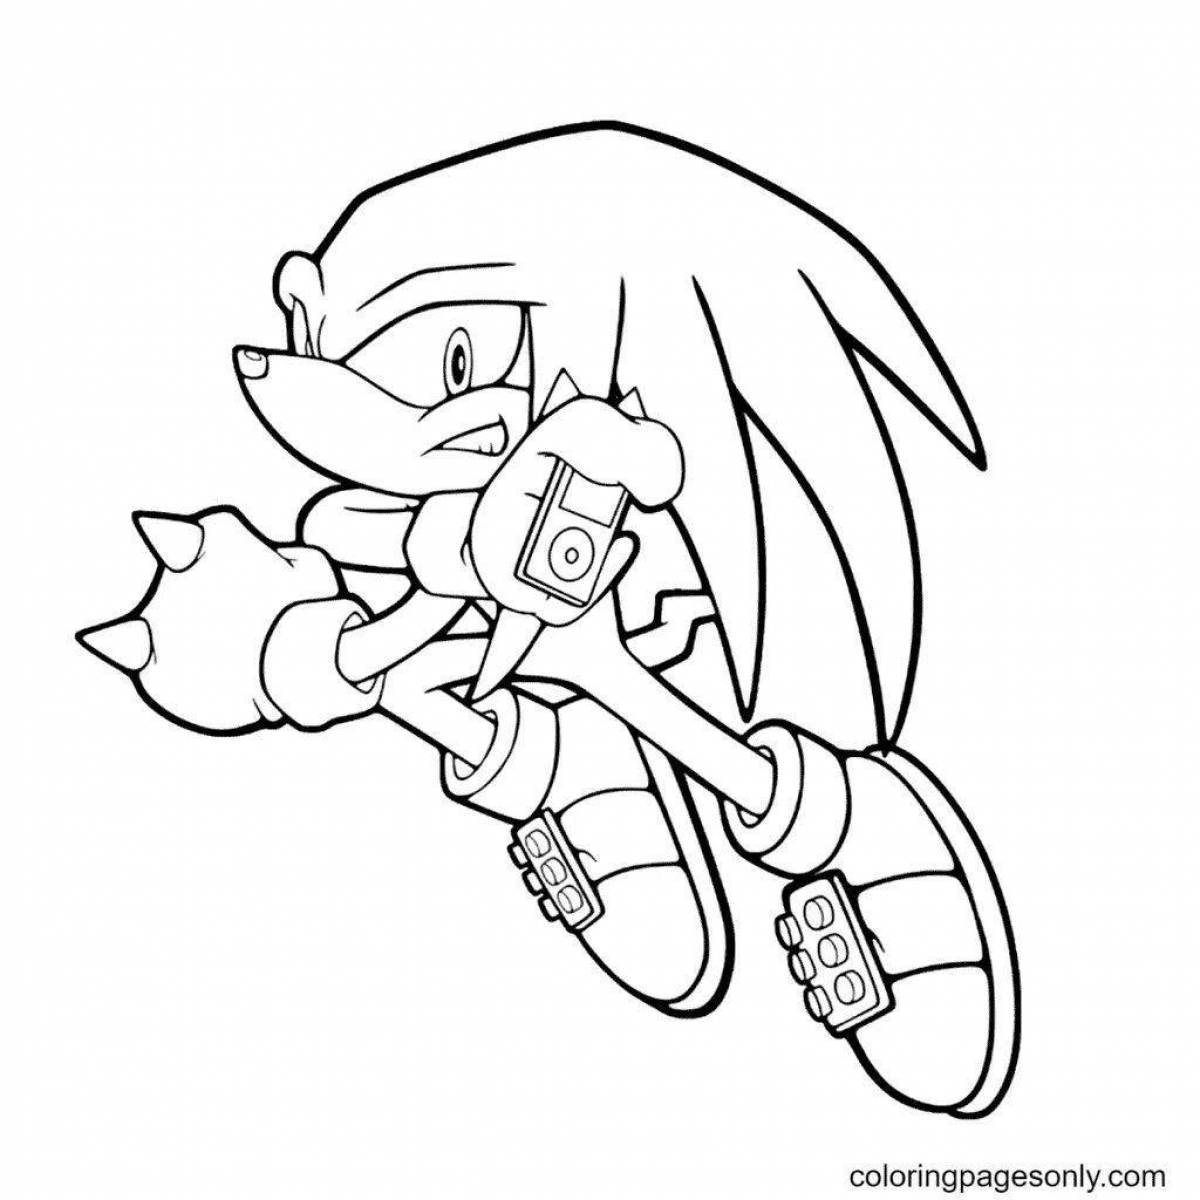 Color-lively coloring page sonic for children 5-6 years old